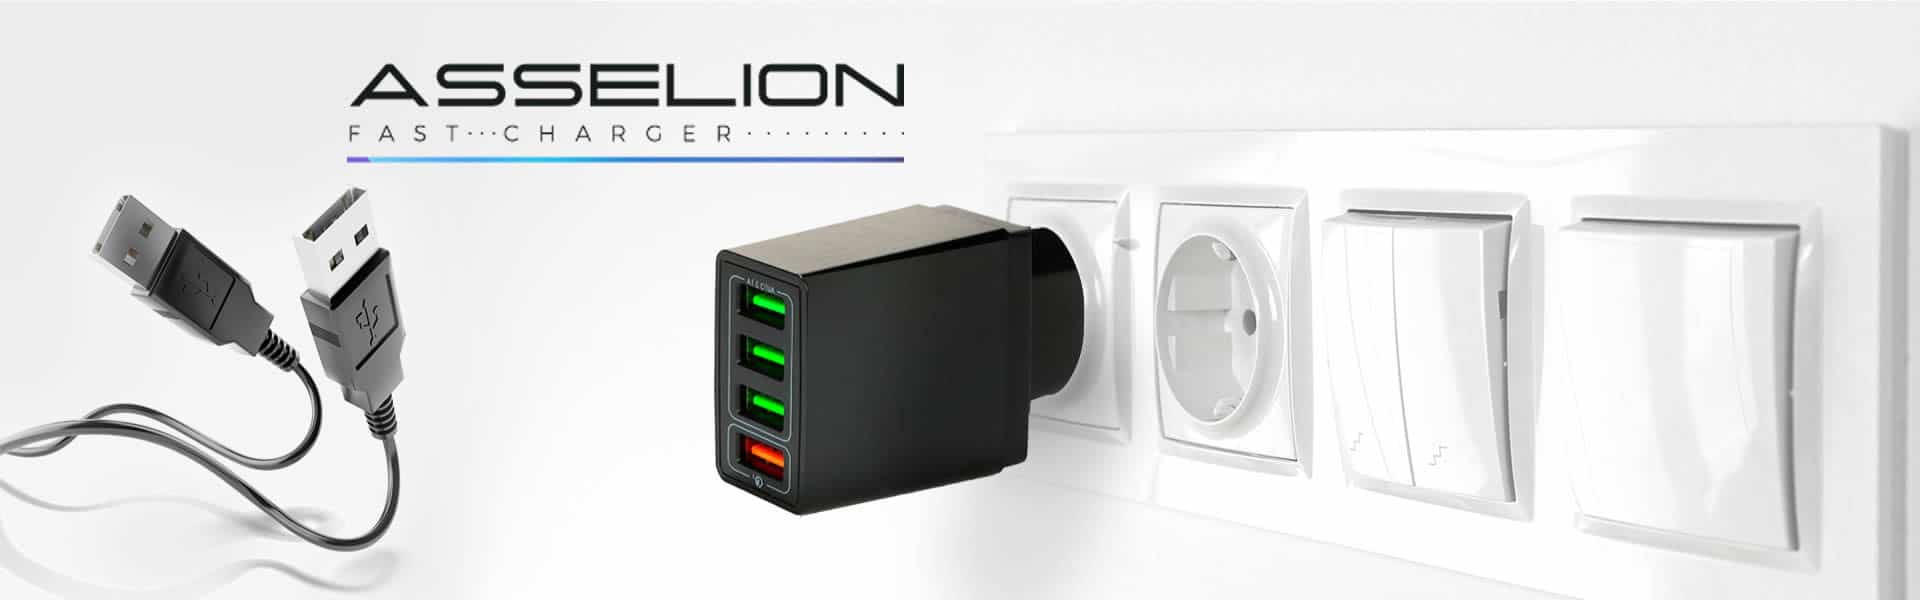 Asselion Fast Charger, reseñas y opiniones